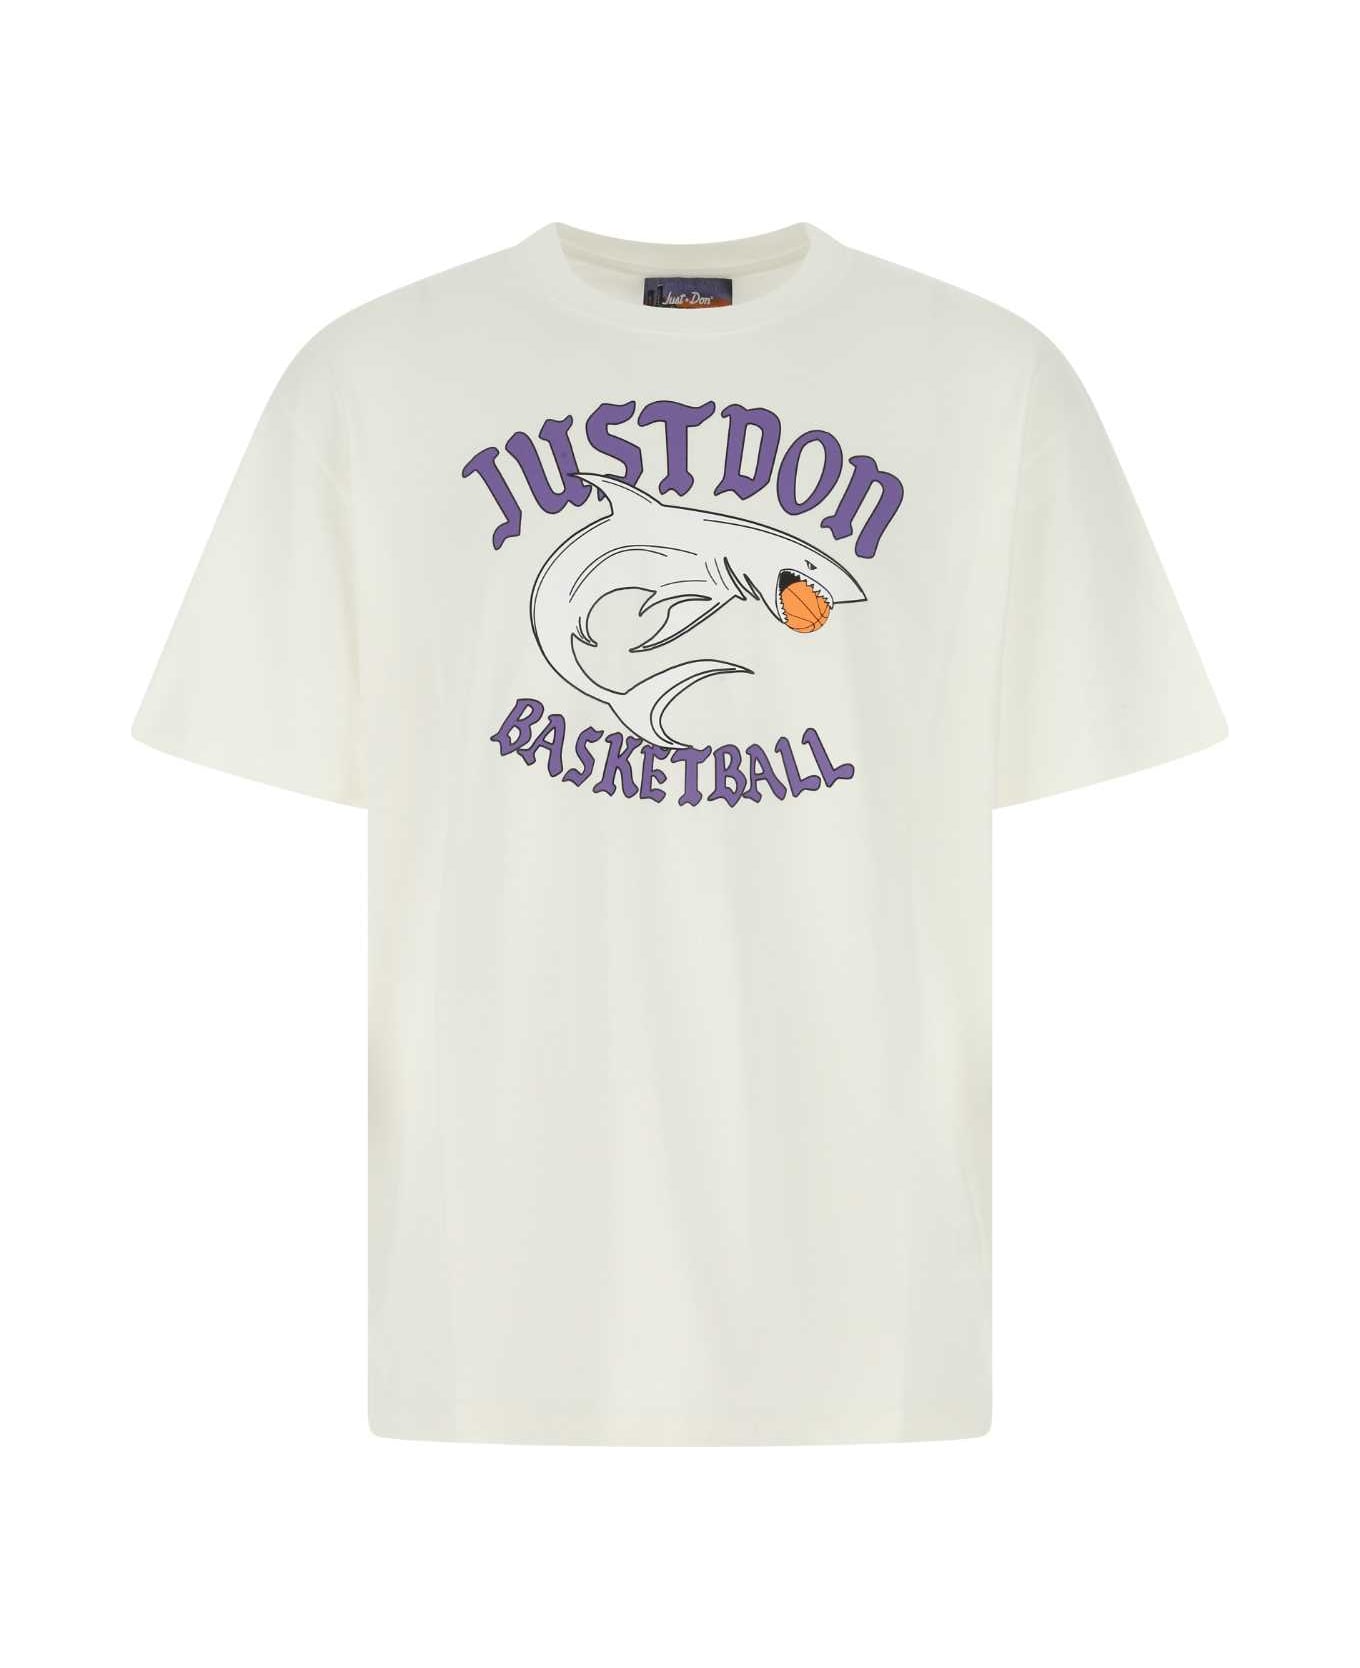 Just Don White Cotton Oversize T-shirt - 02 シャツ